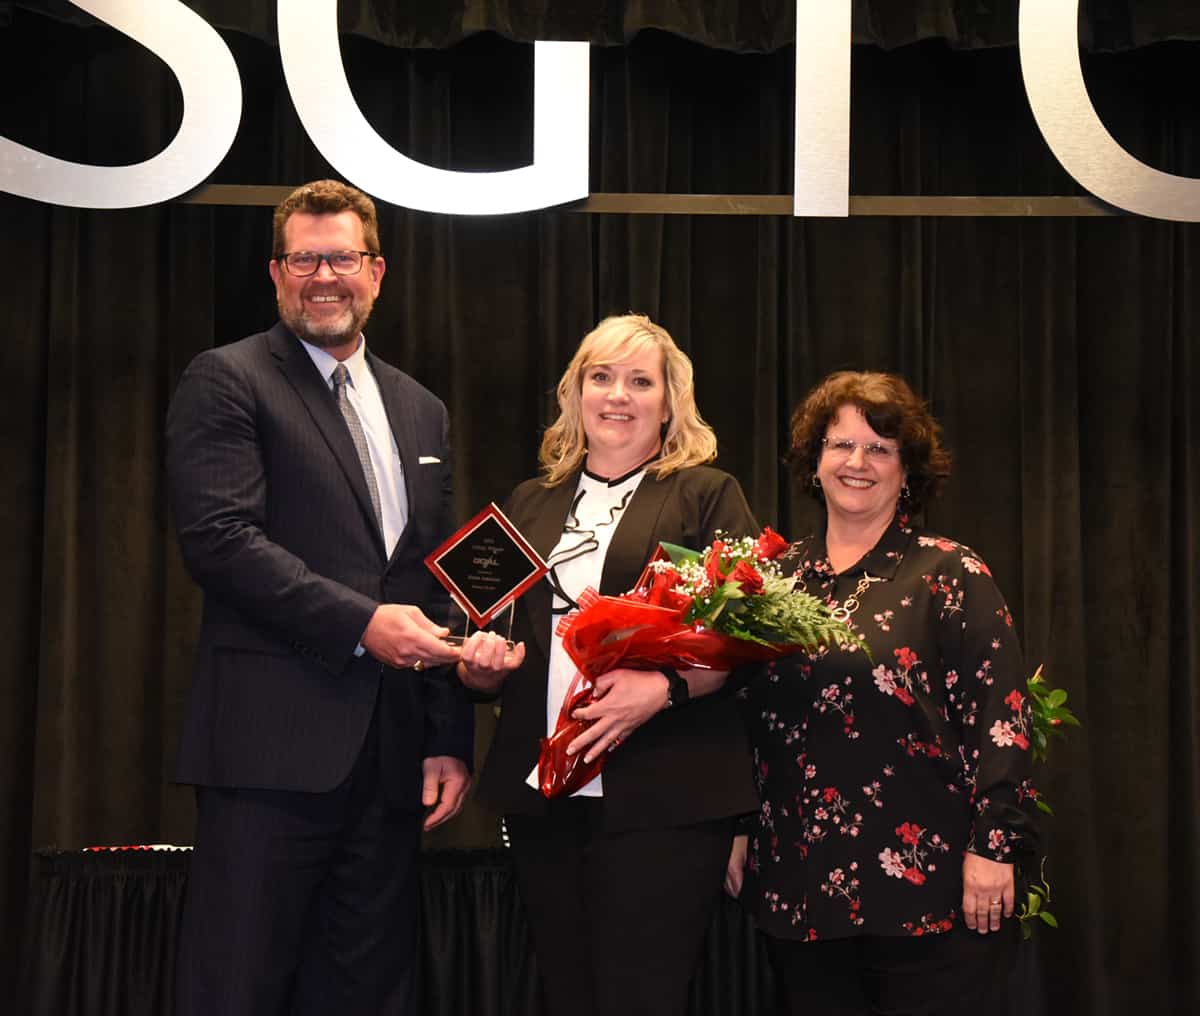 South Georgia Technical College President Dr. John Watford (l to r) is shown above with the SGTC 2021 GOAL Winner Dawn Ammons and SGTC GOAL Coordinator and Assistant Vice President of Student Affairs Vanessa Wall.